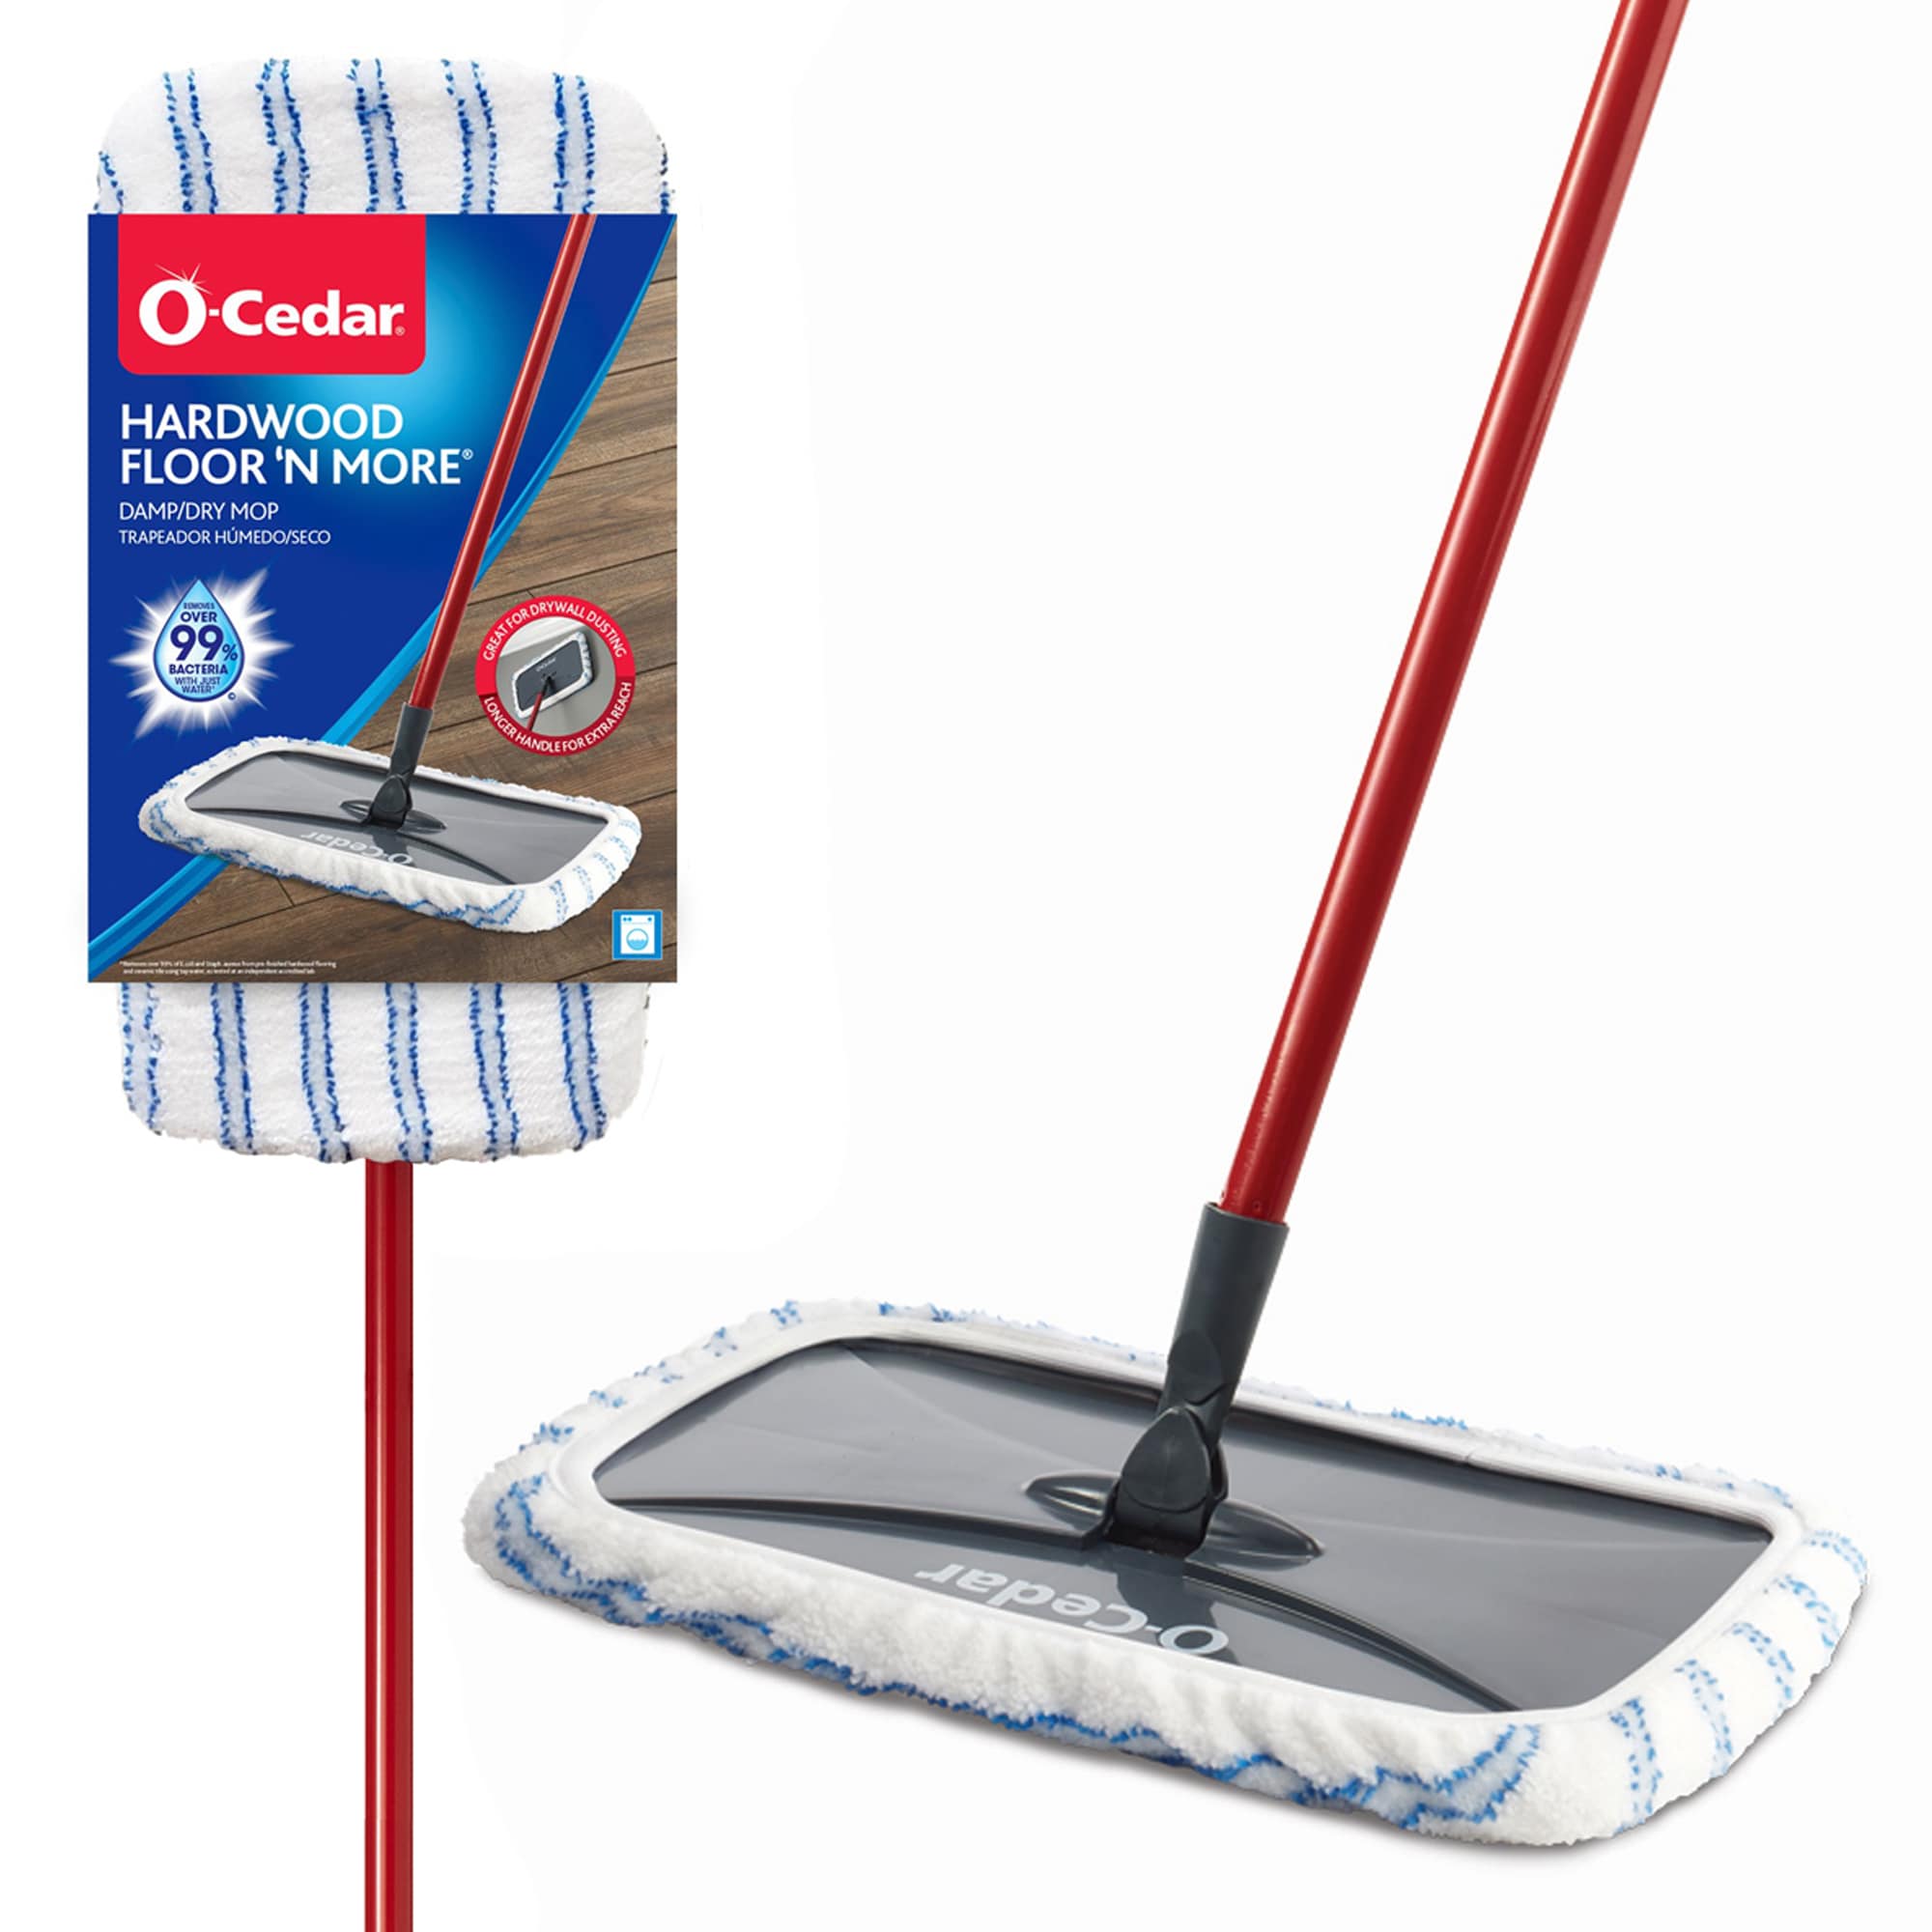 Speed Cleaning™ Wet/Dry Mop Kit (2 Wet Pads, 1 Dry Pad)